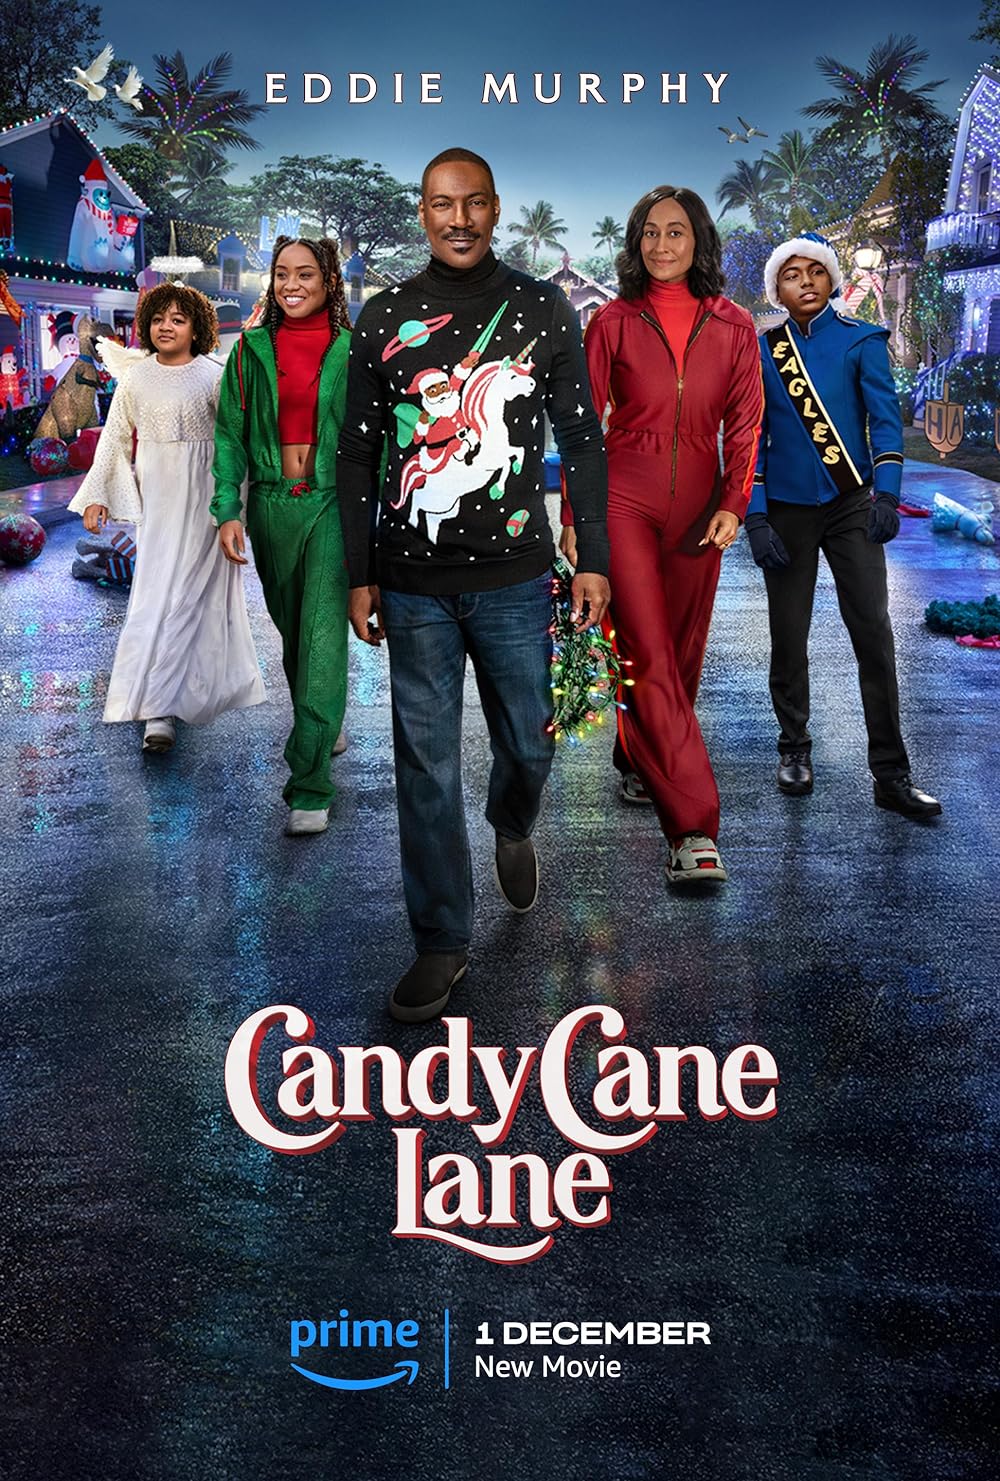 "Candy Cane Lane" Becomes Prime Video's Most-Watched Amazon MGM Studios-Produced Movie Debut Ever